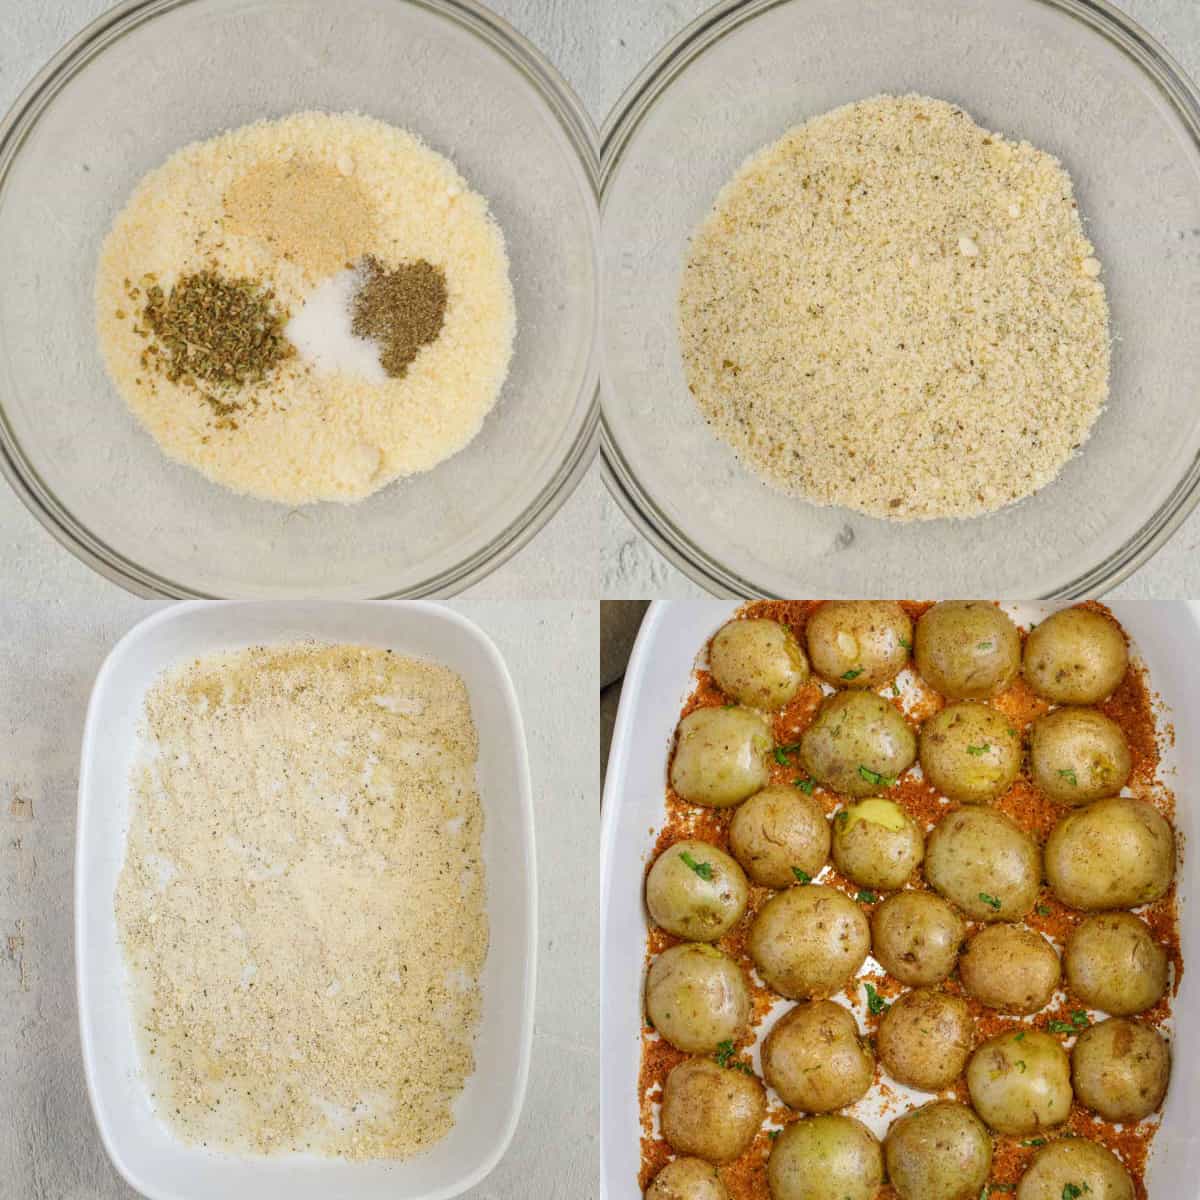 Step by step image collage on how to make crusted potatoes.